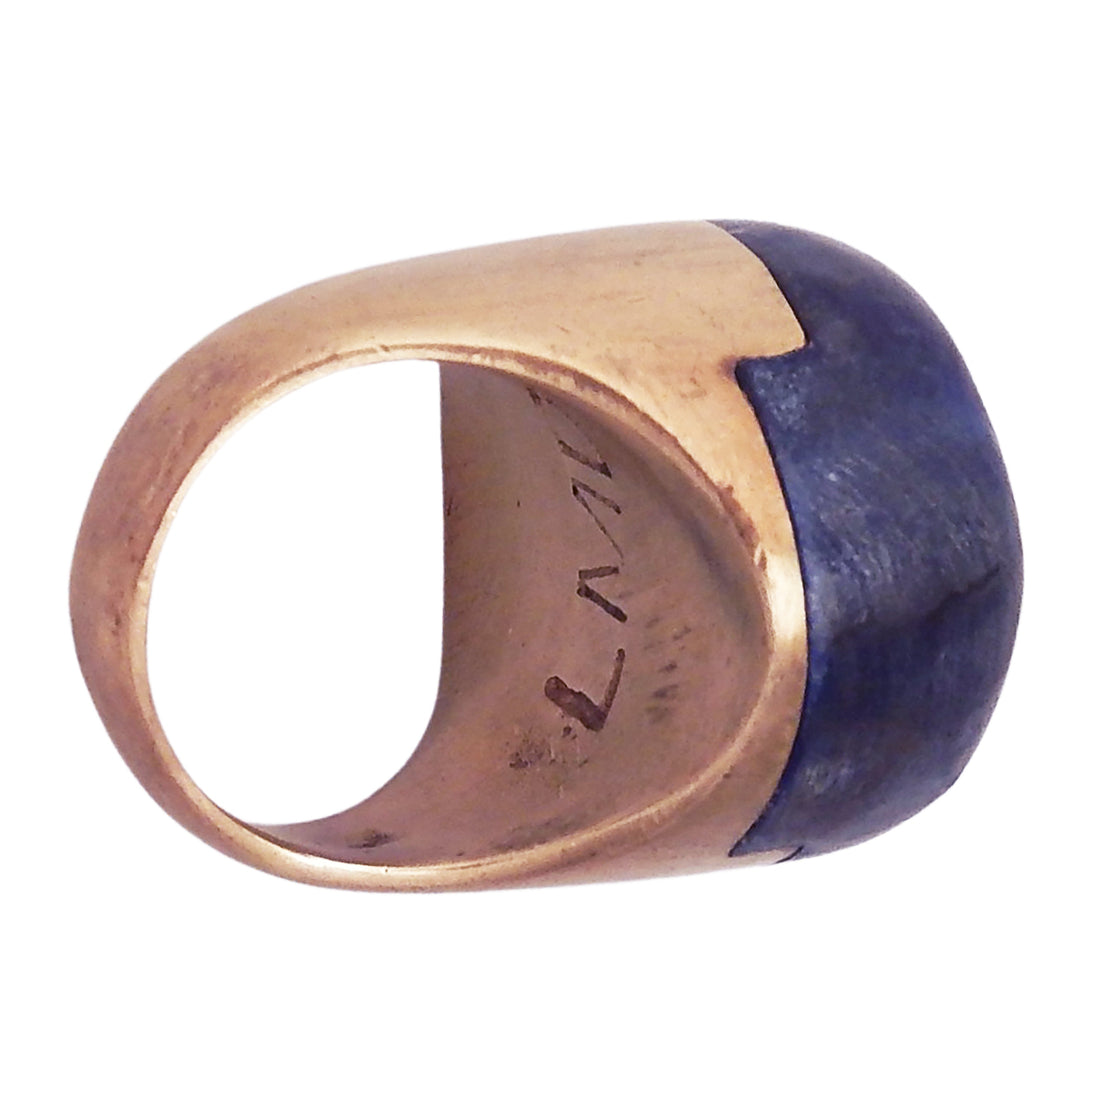 LYDIA MARCOS DESIGN - "STATEMENT" Chunky Ring with Blue Elder Wood and Copper